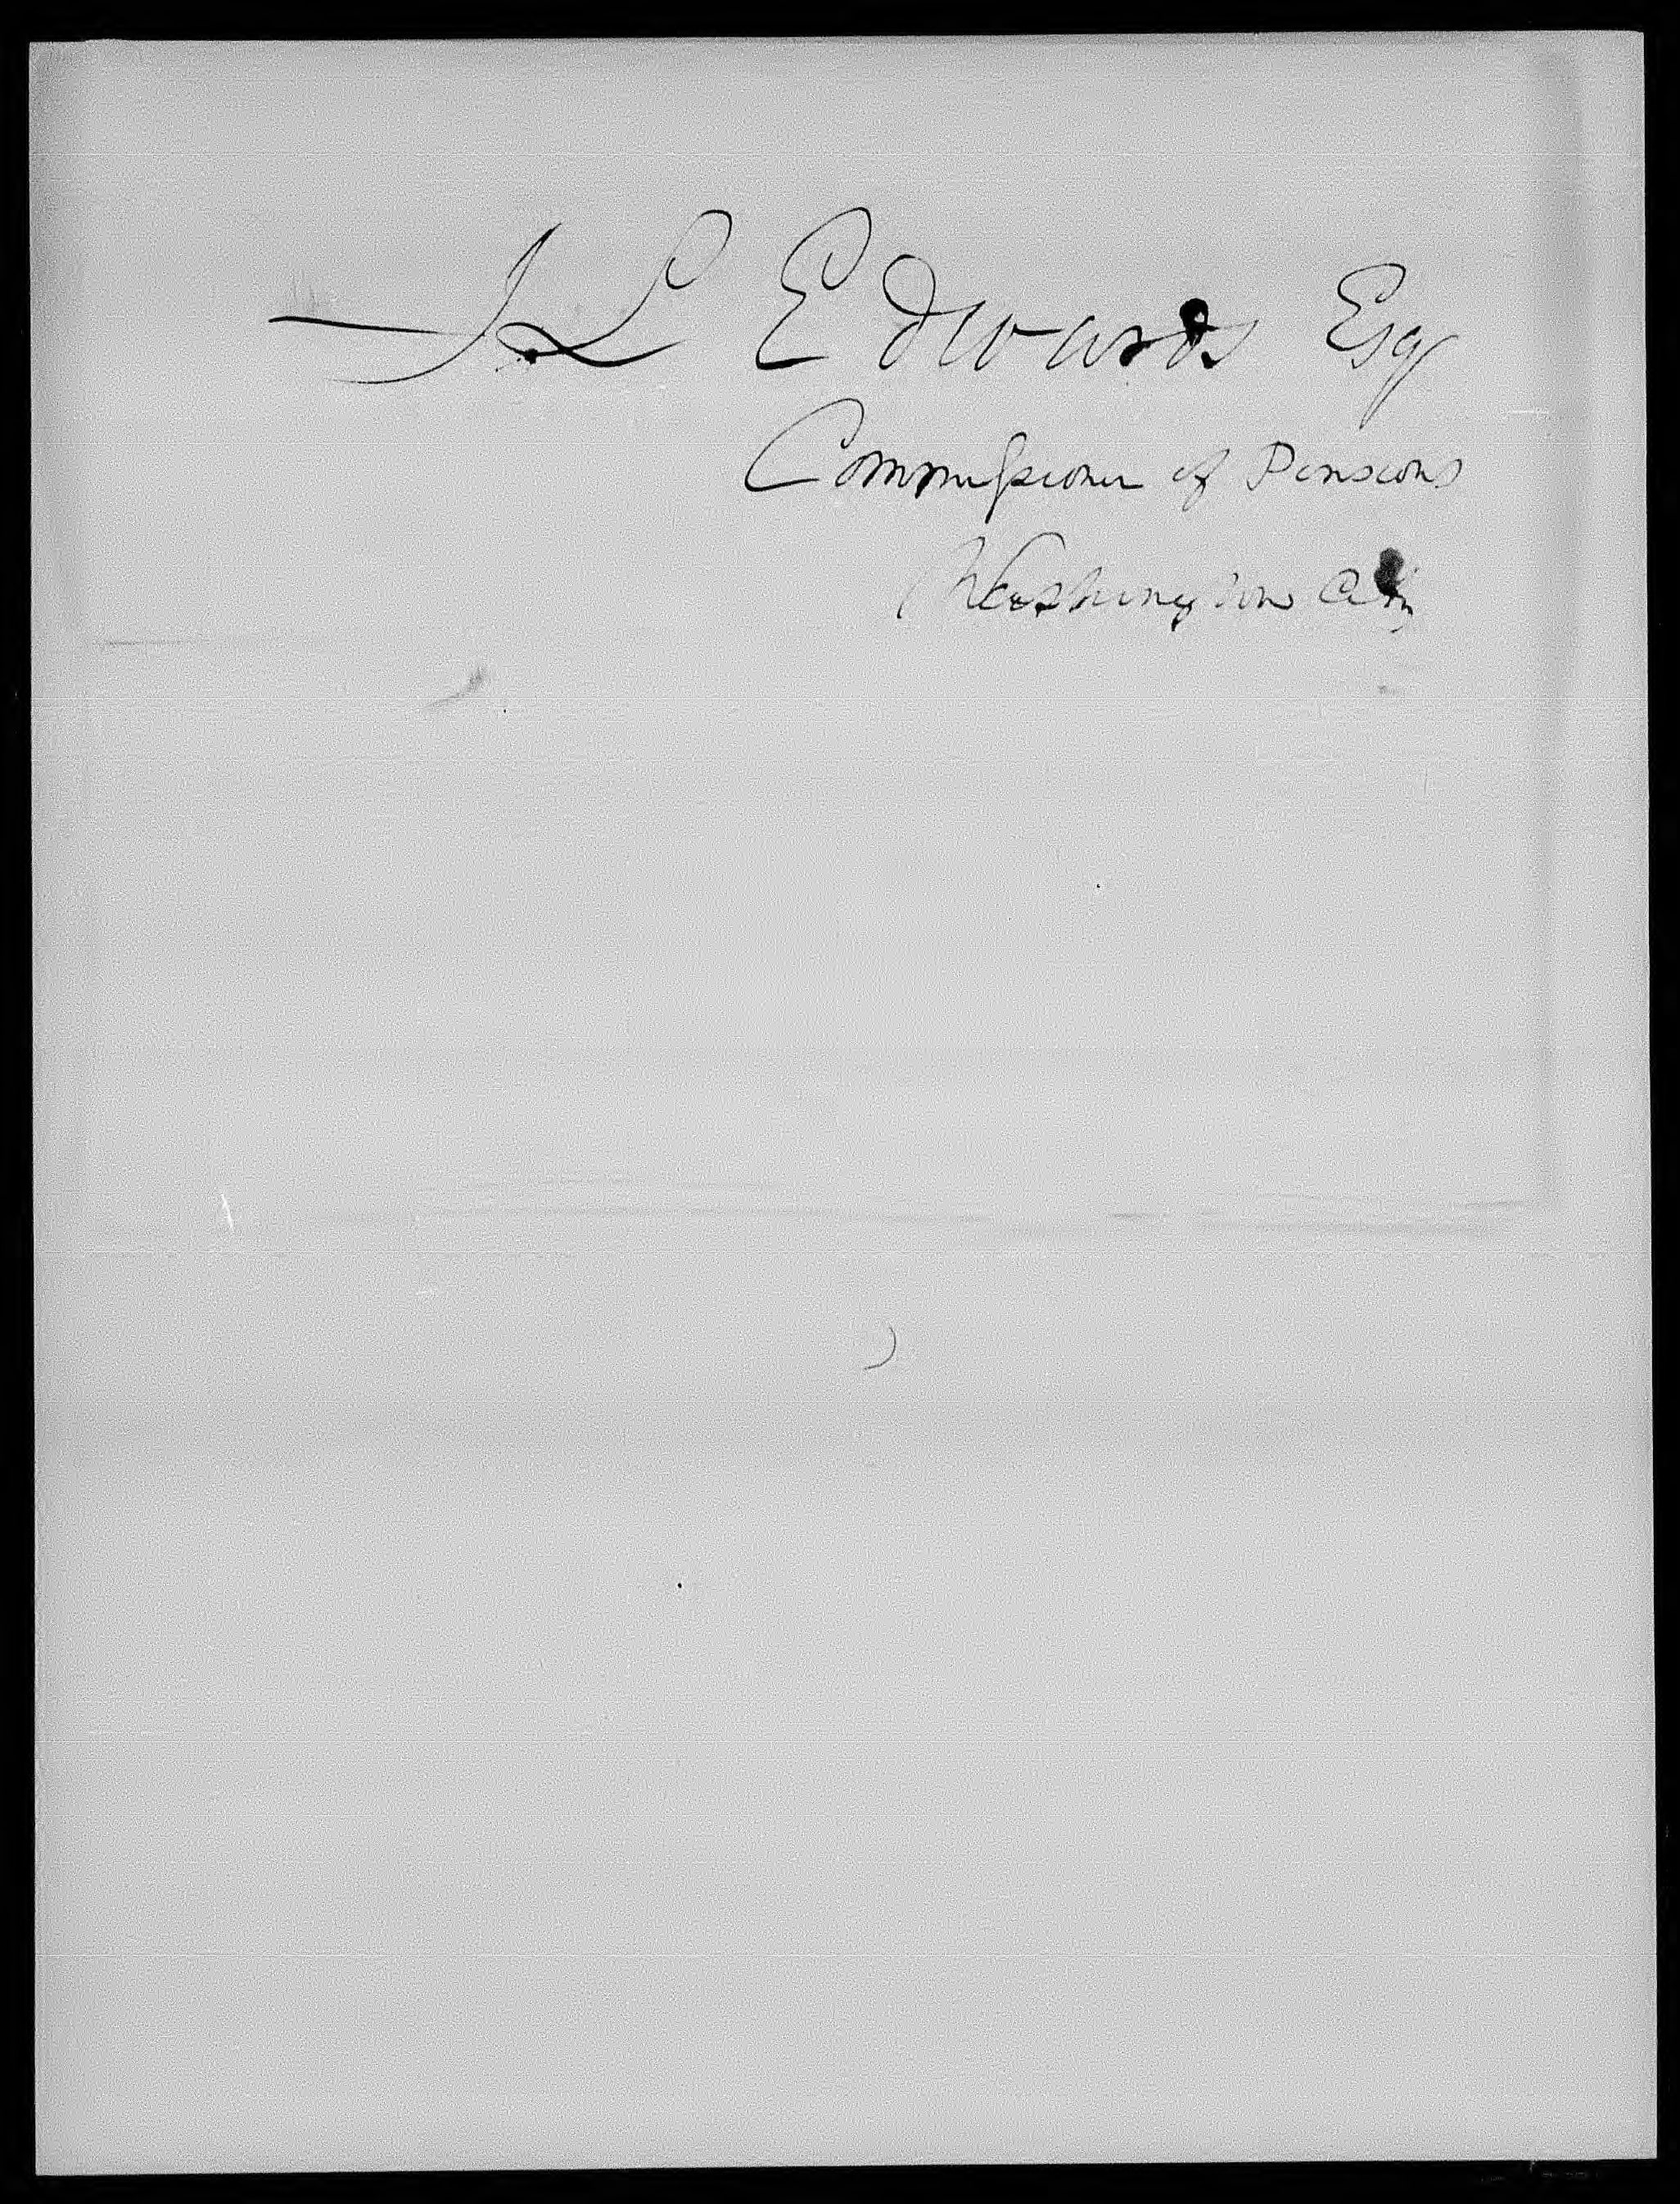 Letter from John Gray Bynum to James L. Edwards, 10 September 1840, page 2